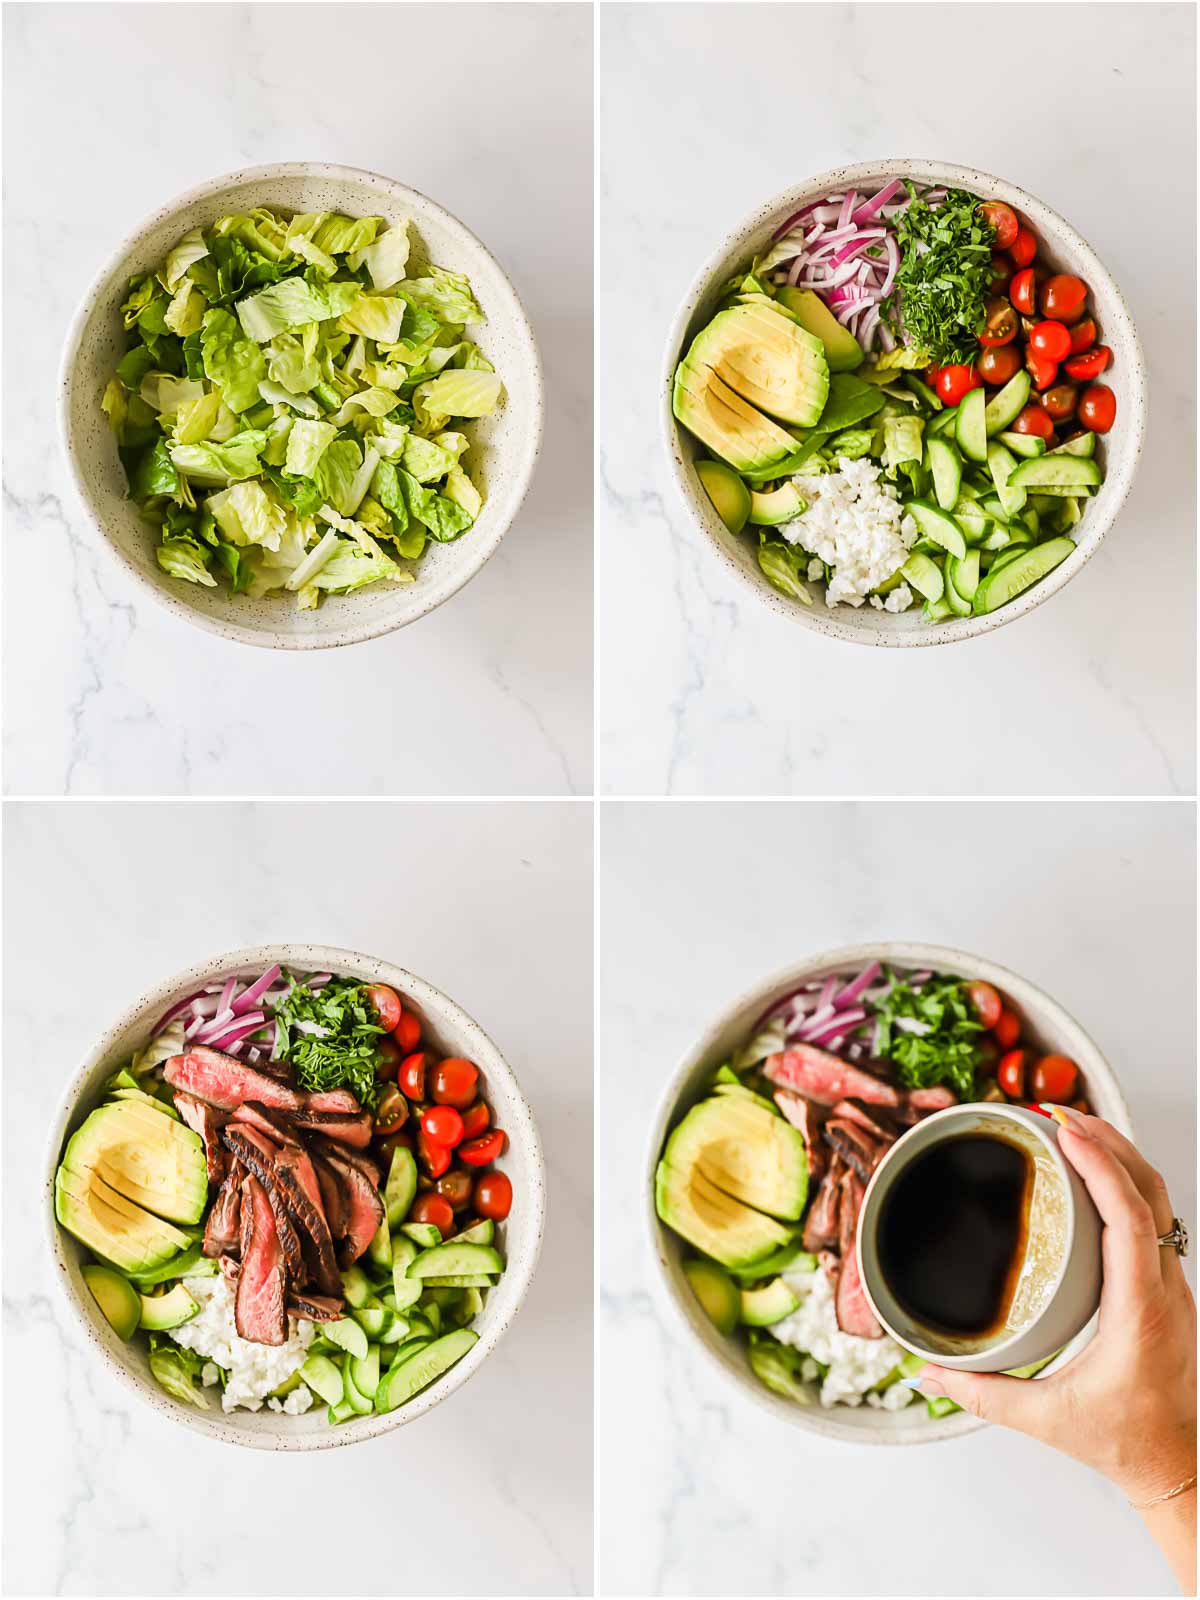 Four images showing the process of assembling a leftover steak salad with dressing.